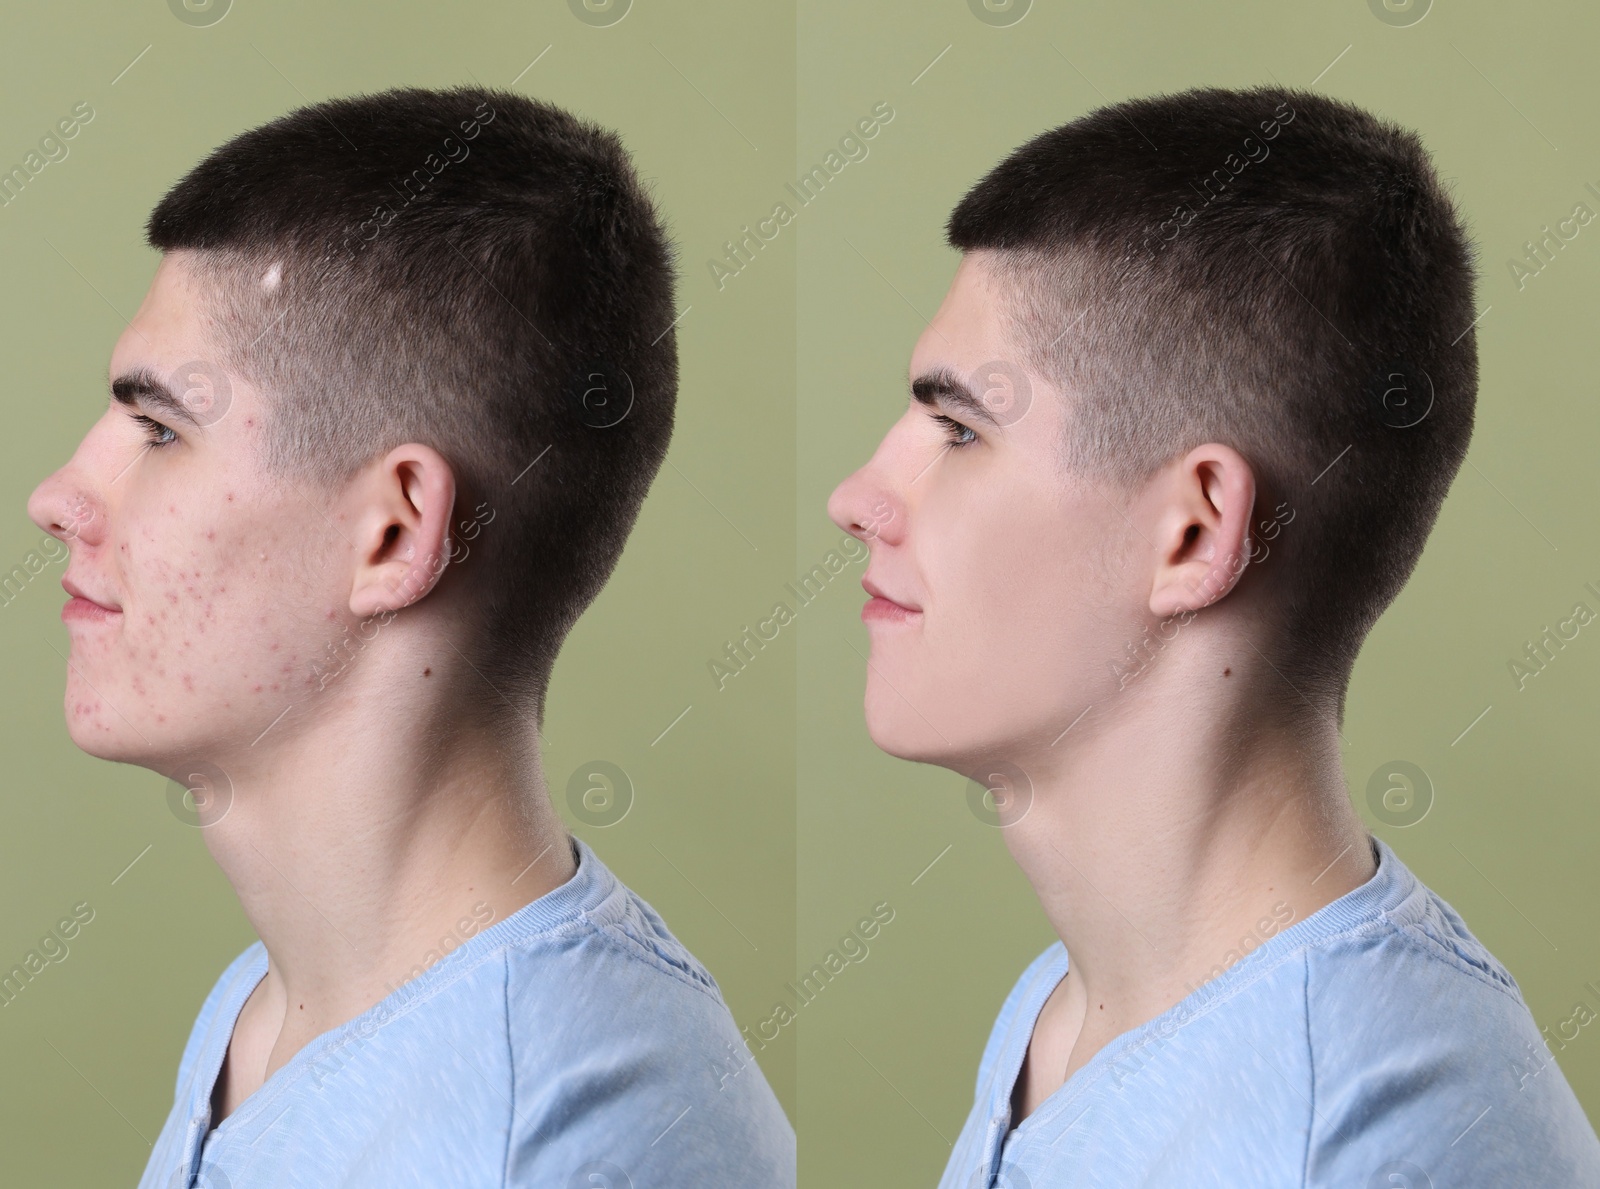 Image of Acne problem. Young man before and after treatment on green background, collage of photos